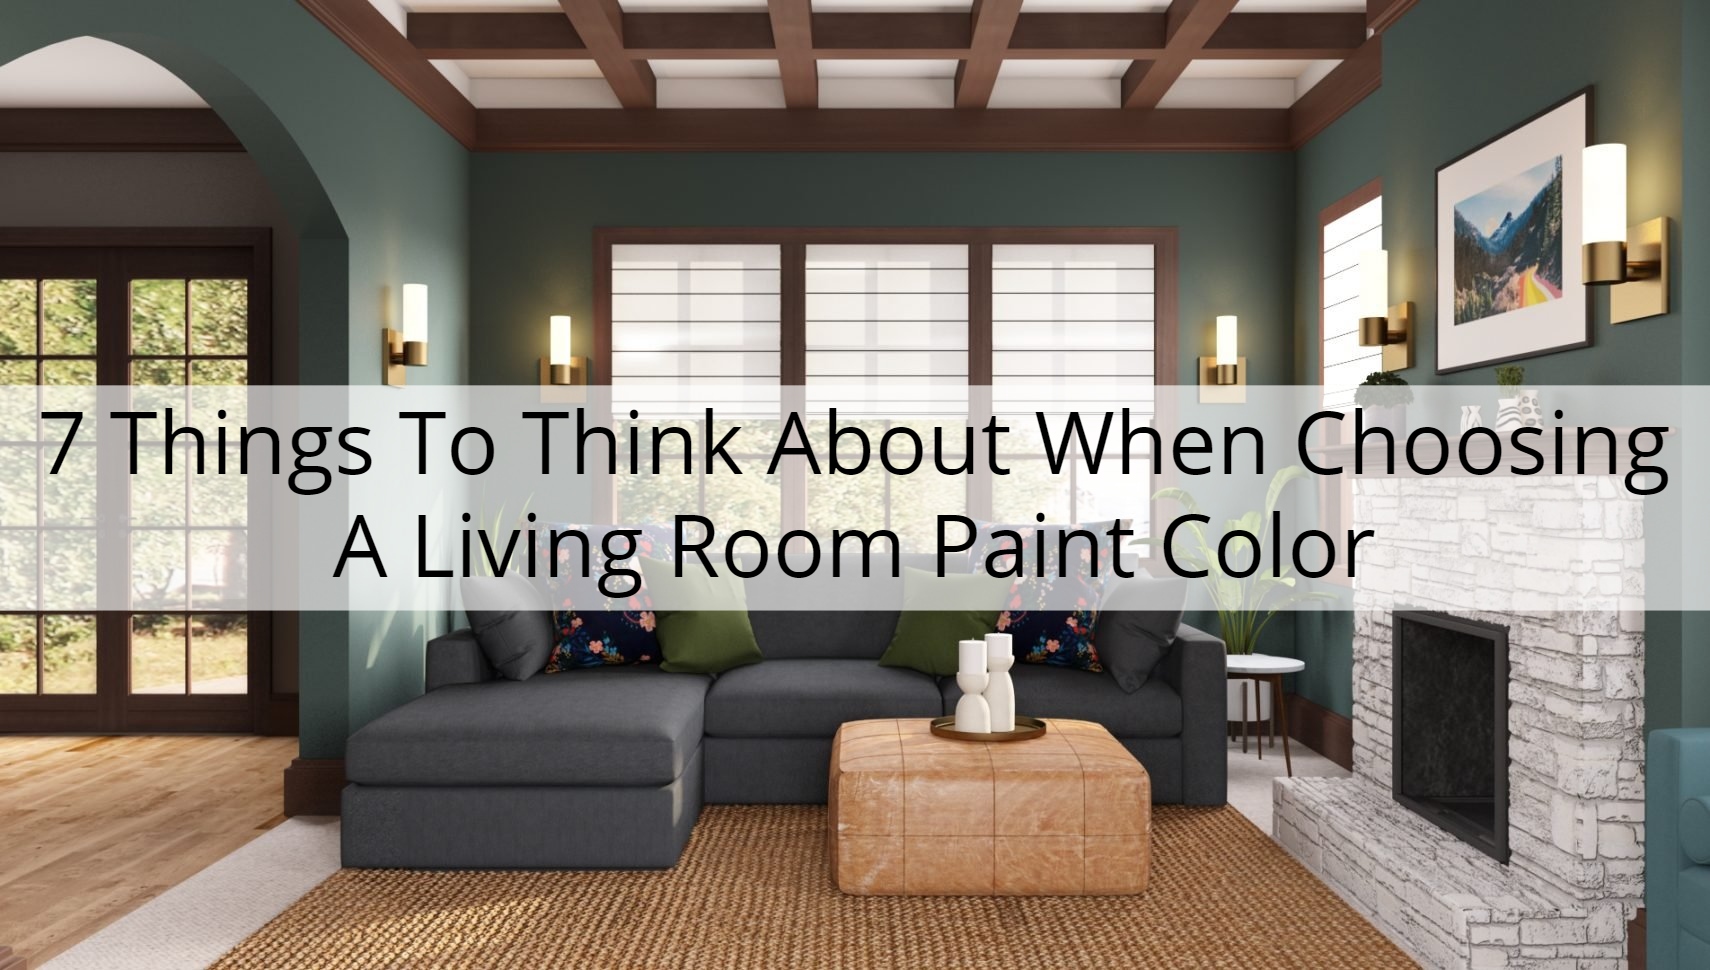 Choosing A Painting For Living Room